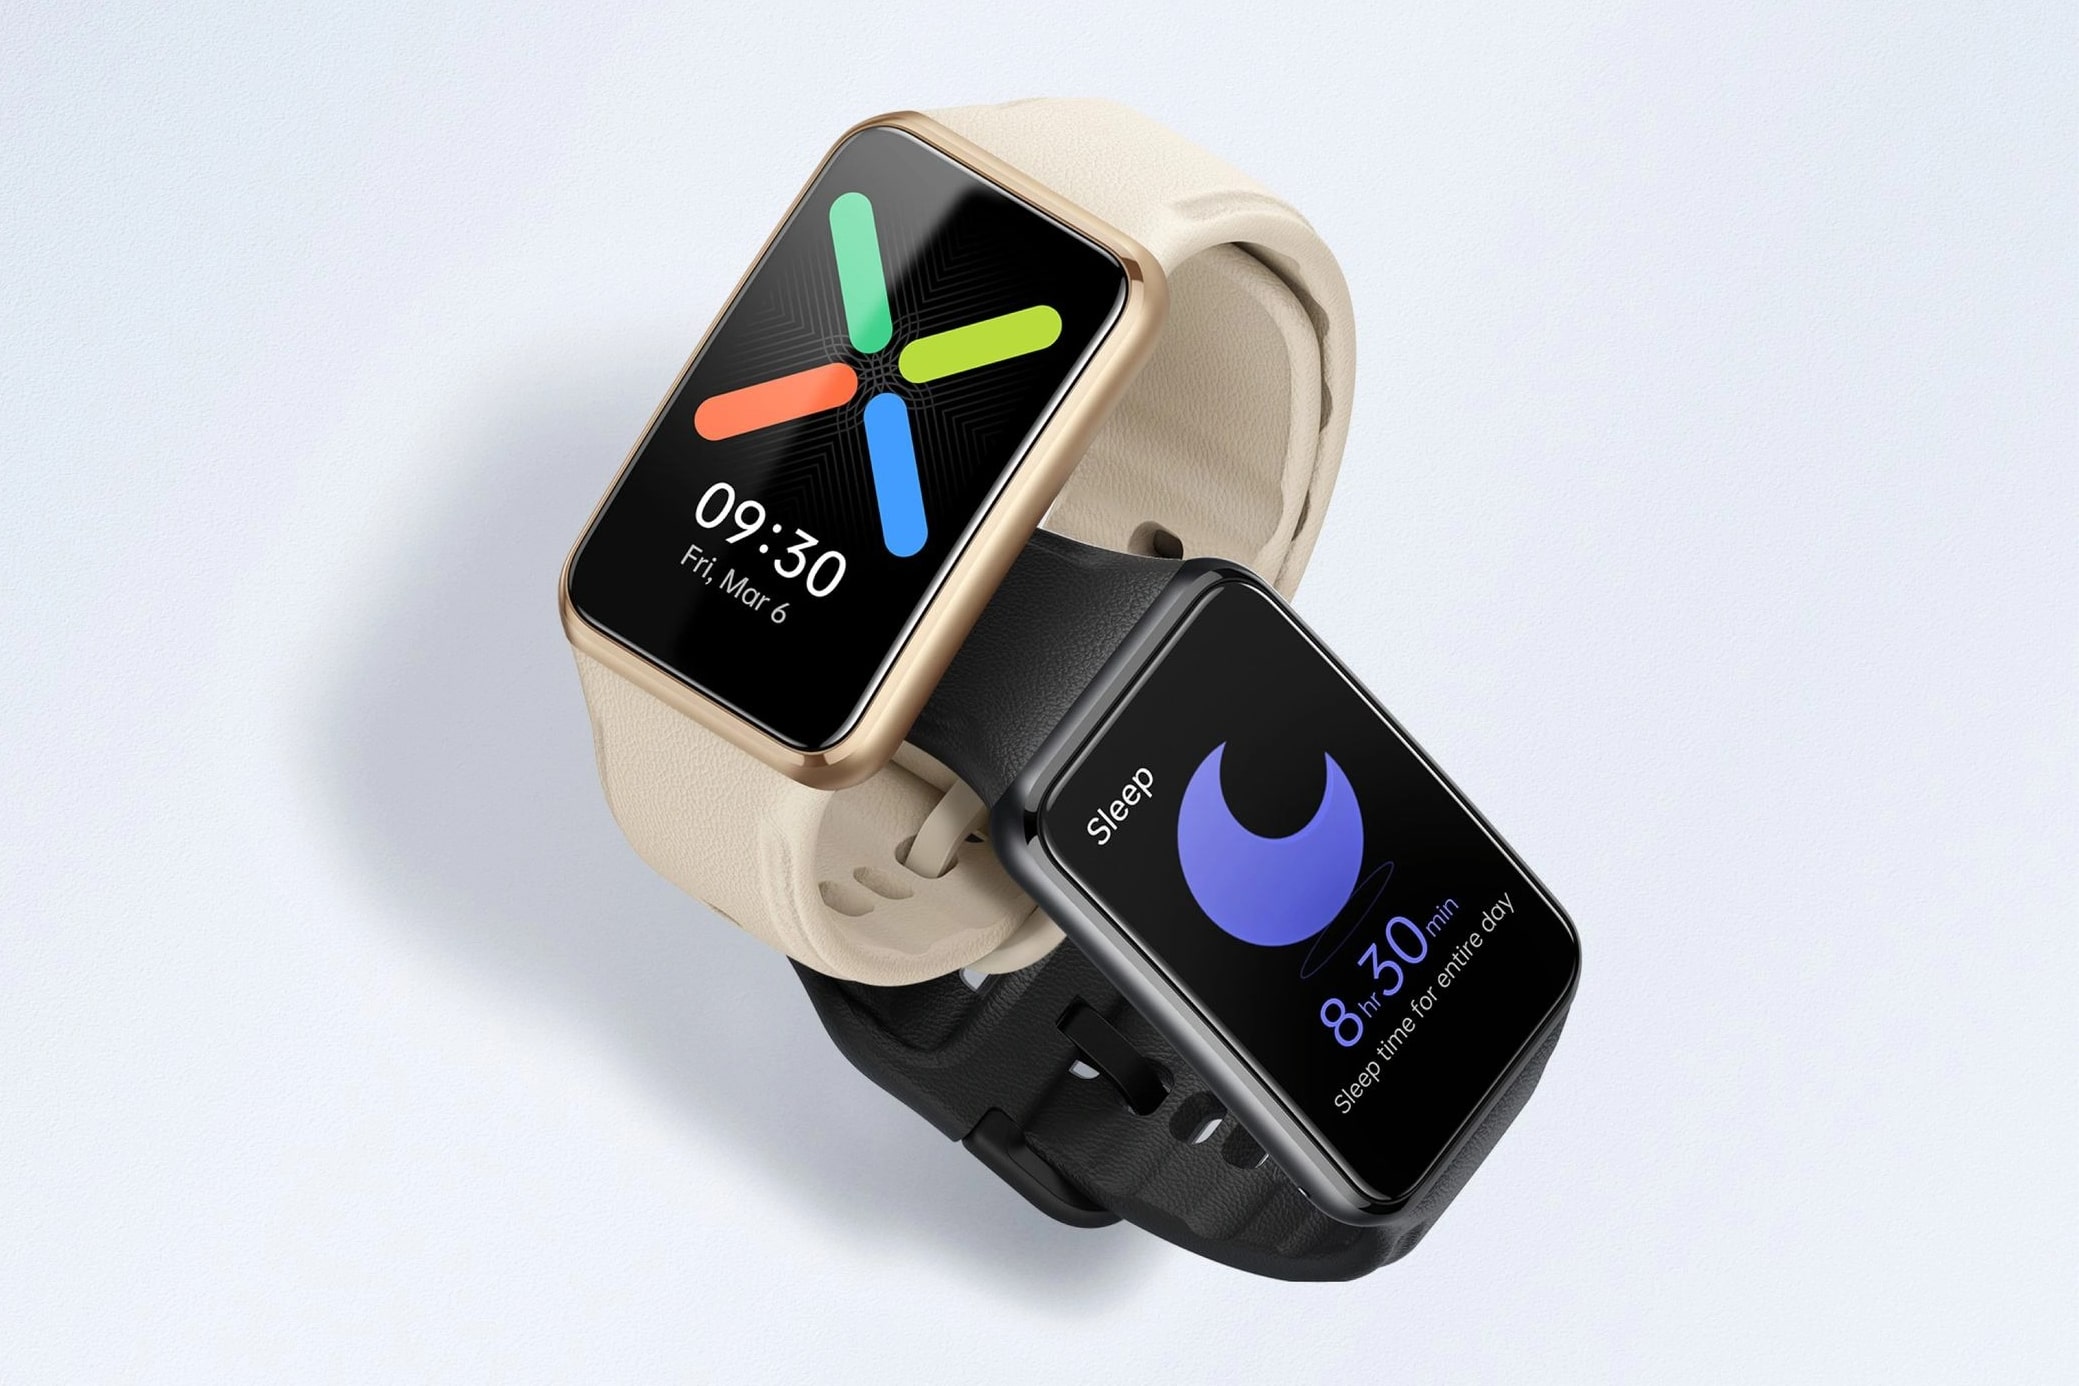 Oppo Watch Free launched in Europe for €99 - Gizmochina